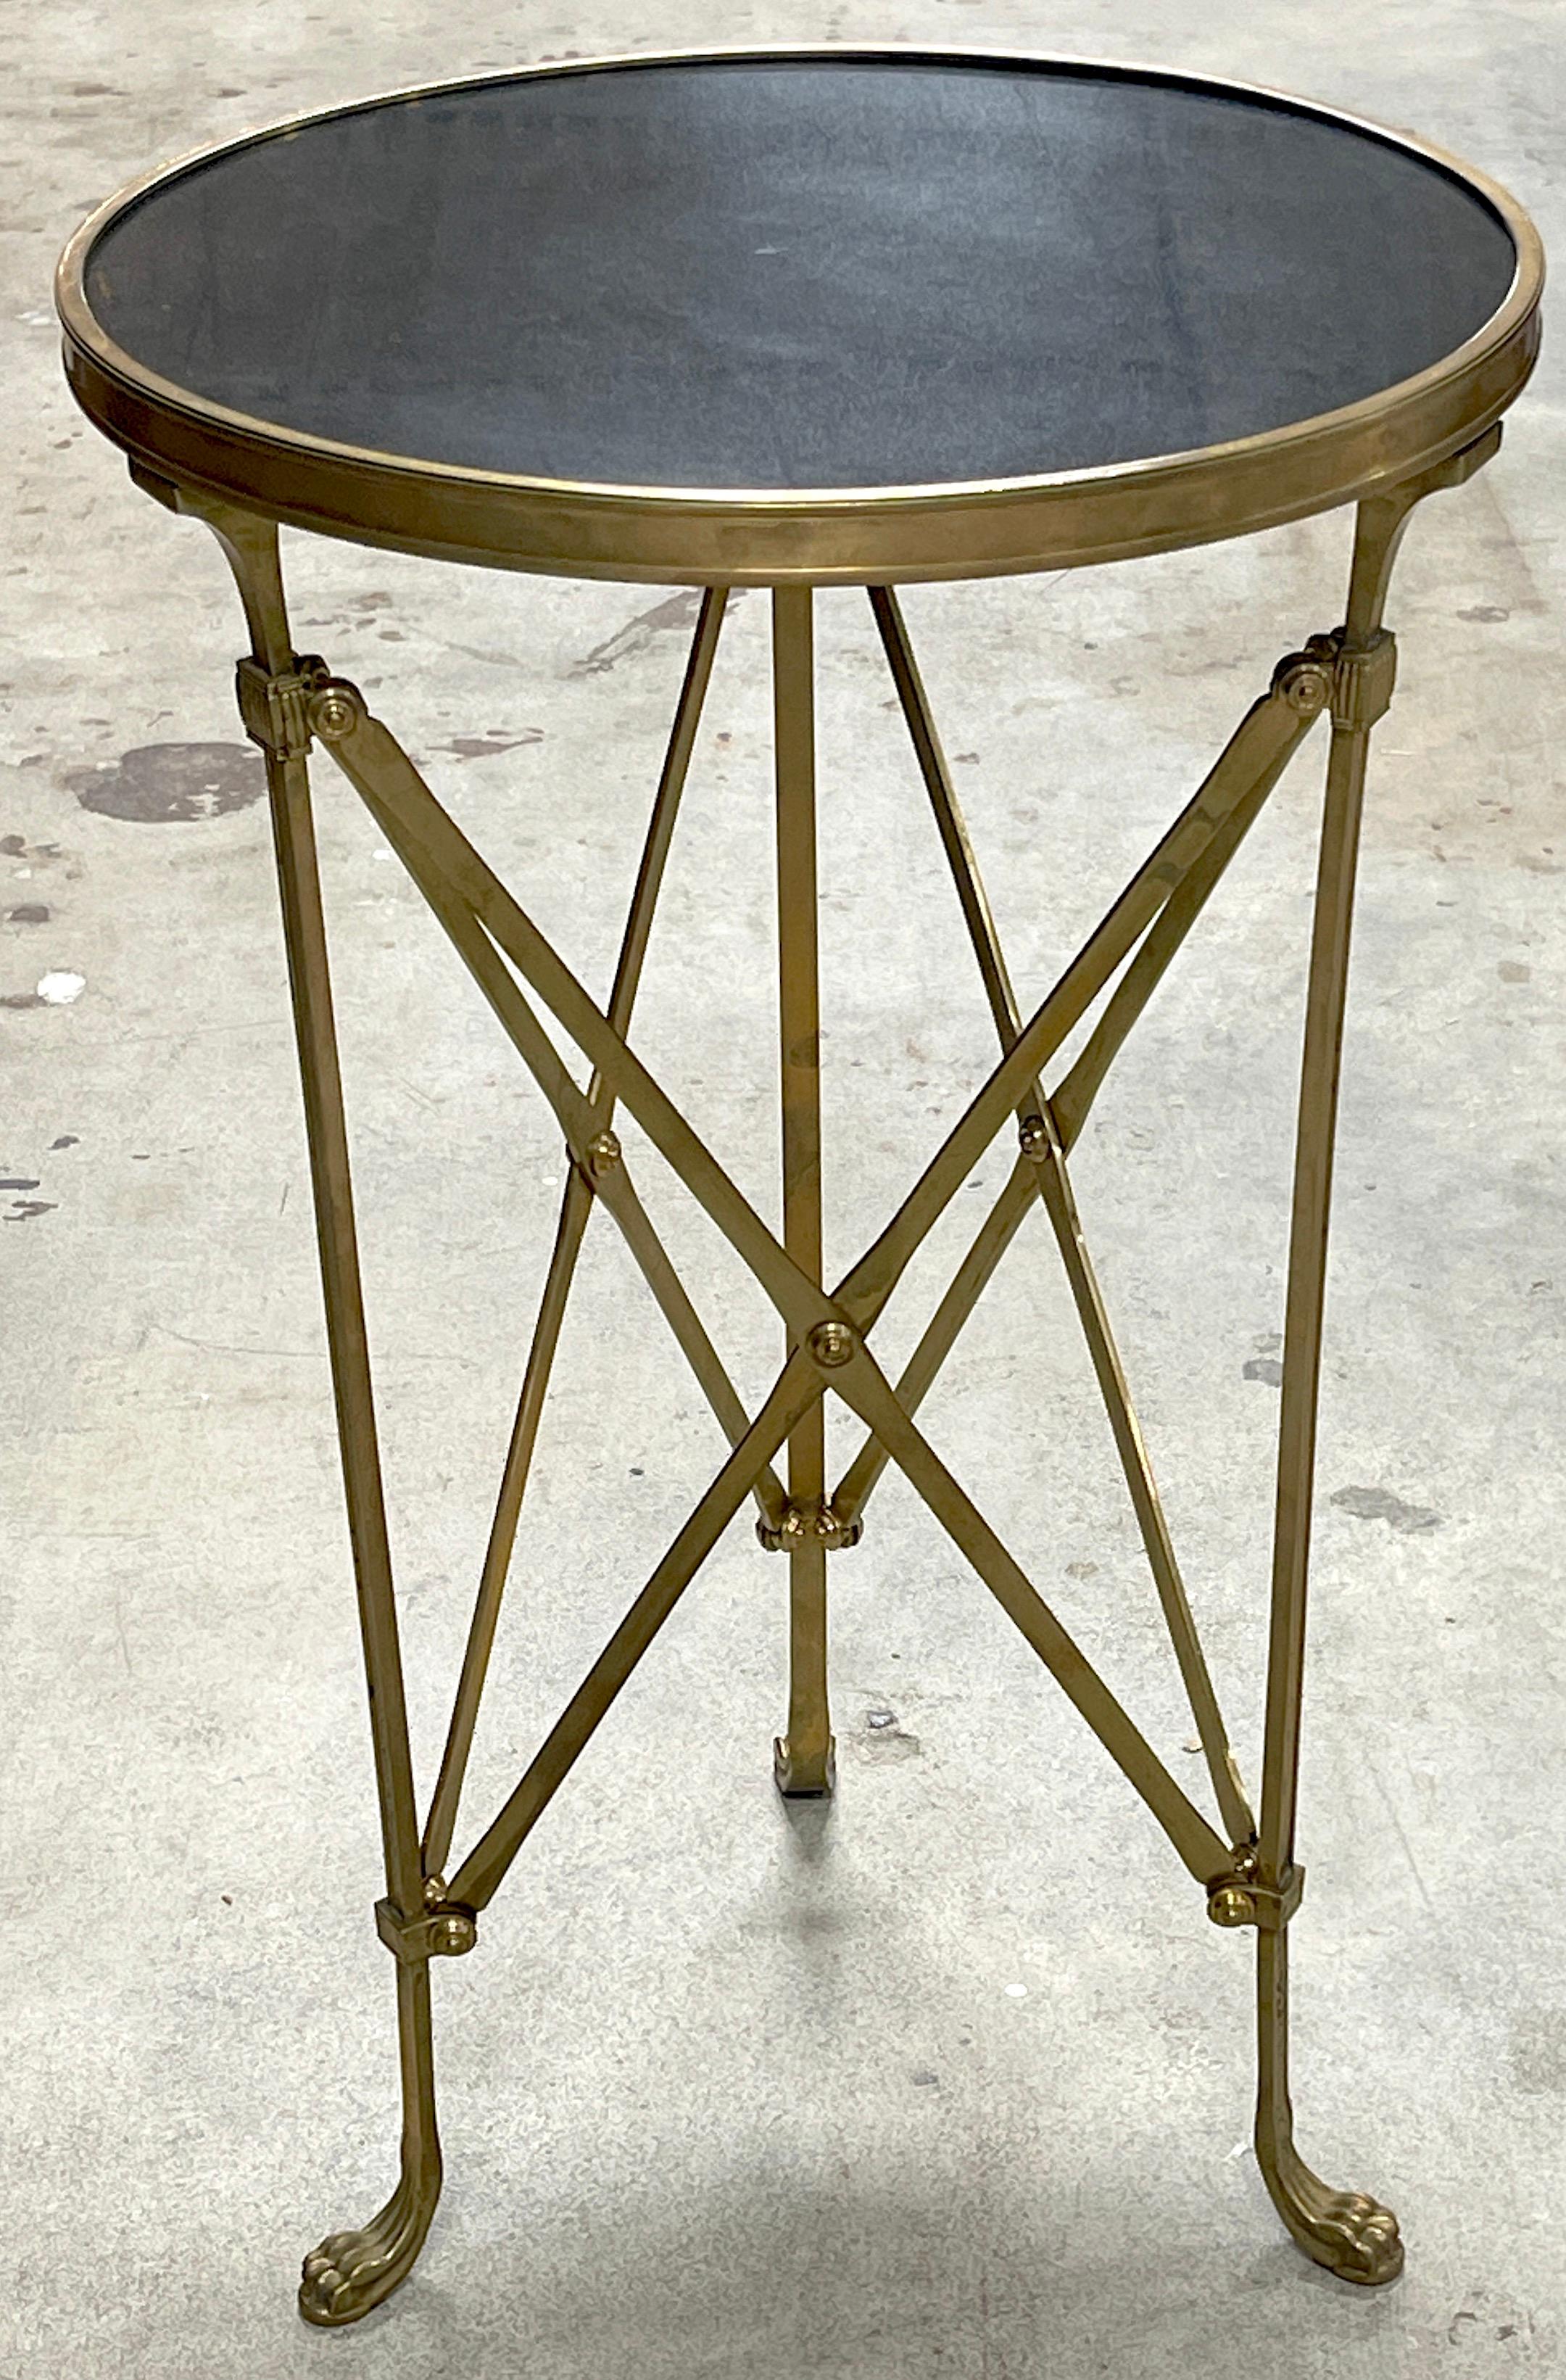 French bronze & marble Neoclassical Gueridon/ side table.
Of typical form, with nice proportions, the inset 17-inch black marble top, resting on a tripartite paw foot column base.